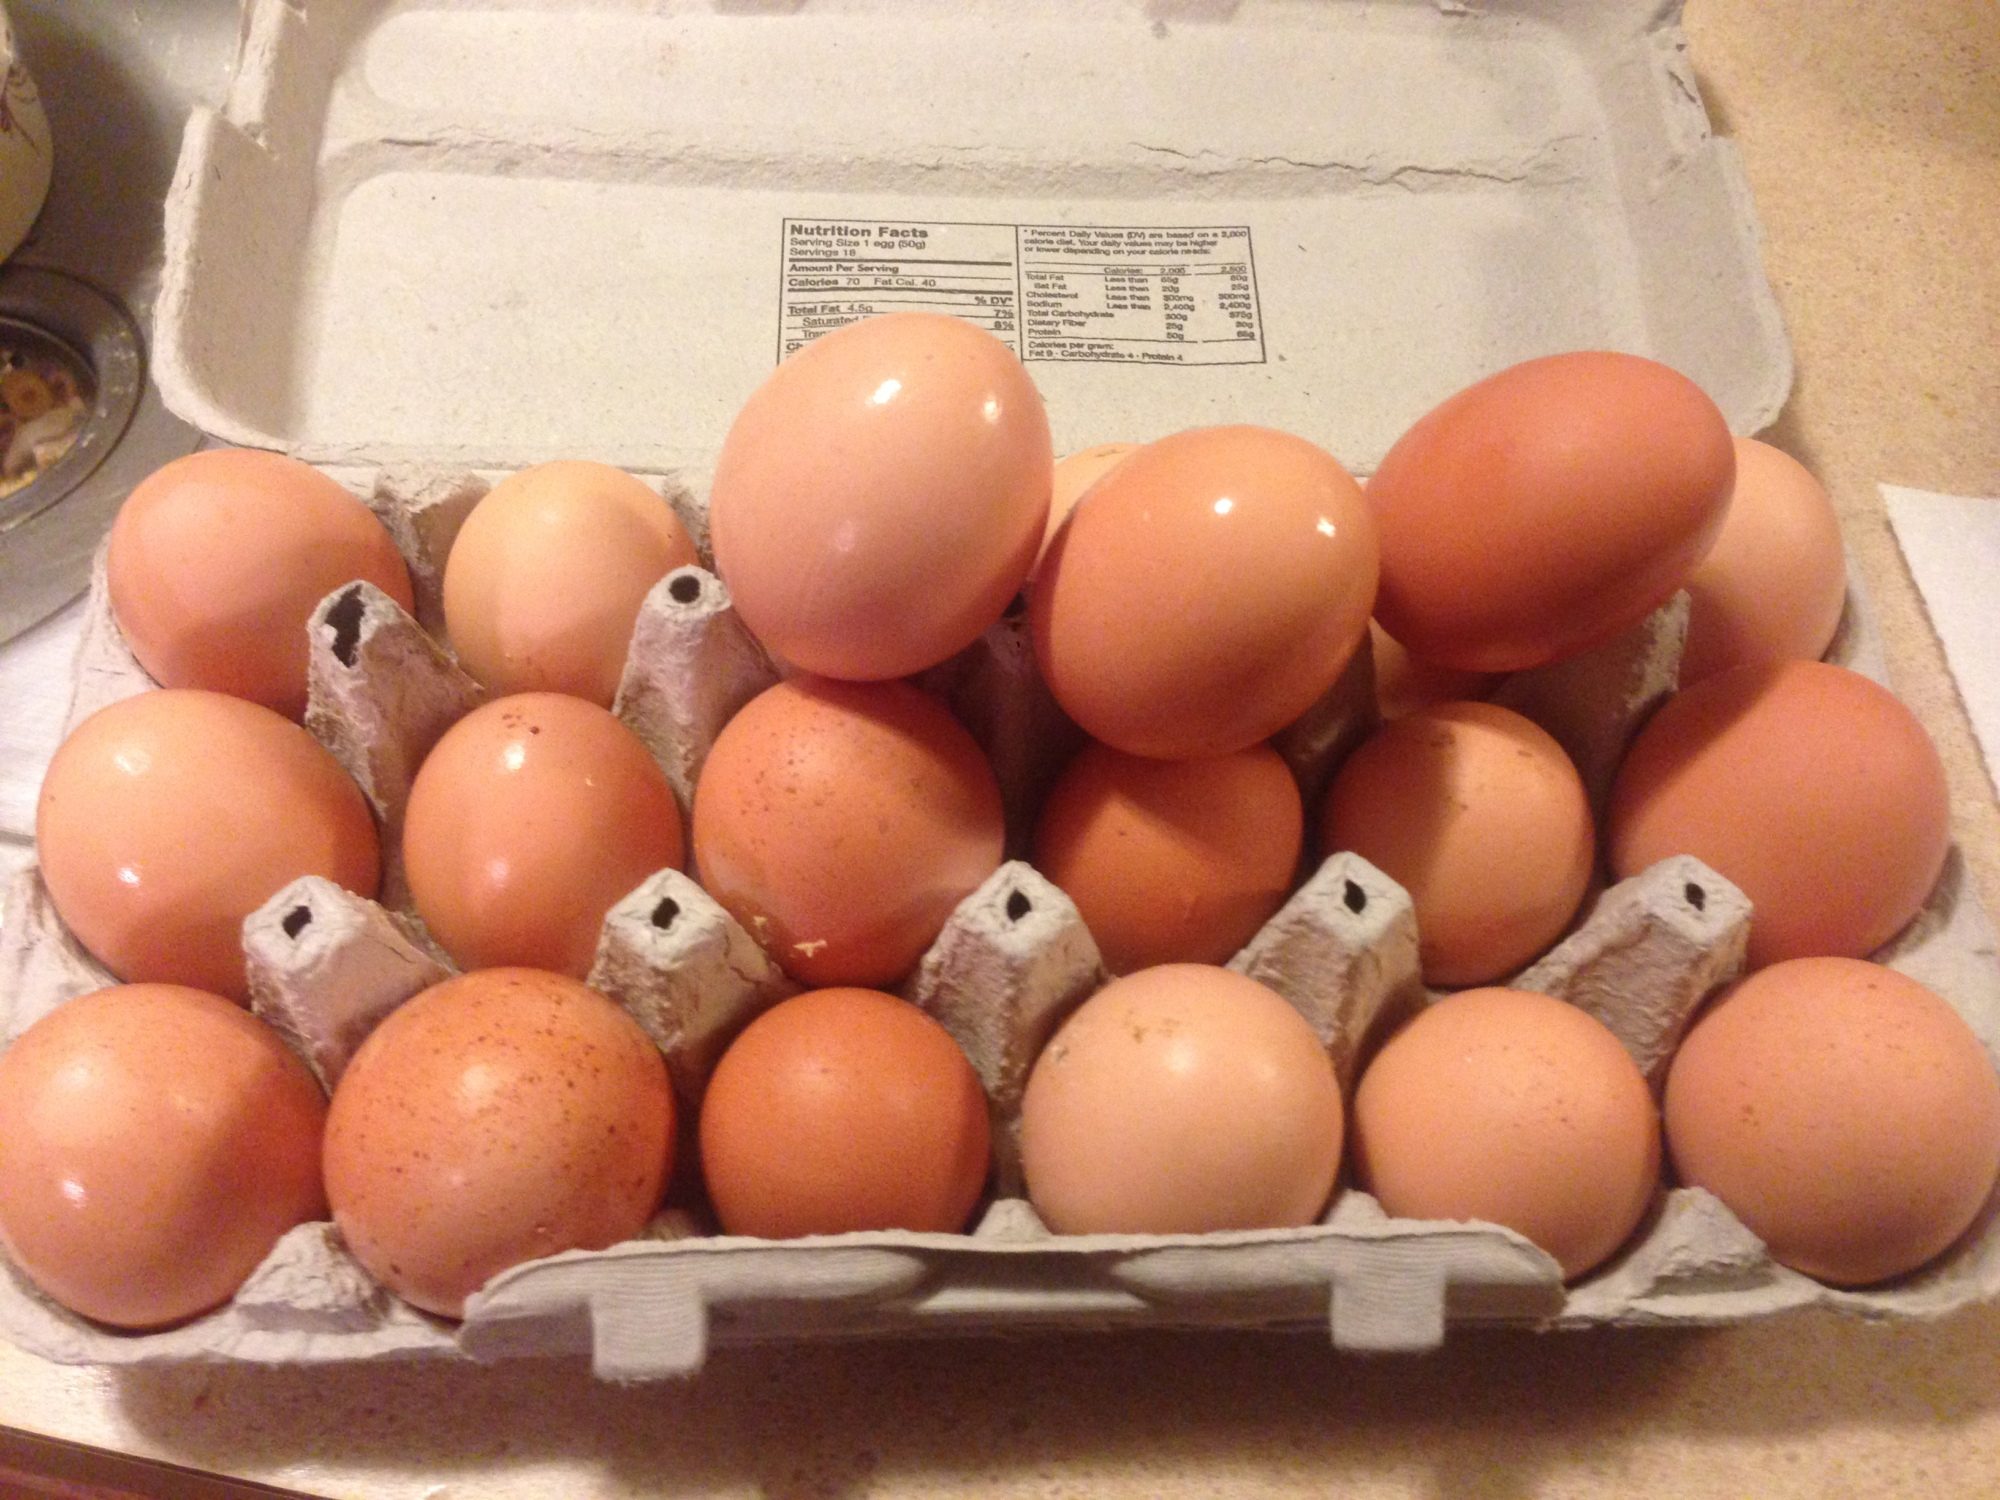 Mid February, 14 degrees out and snow on the ground.  Still getting 8 a day out of 10 hens. :)